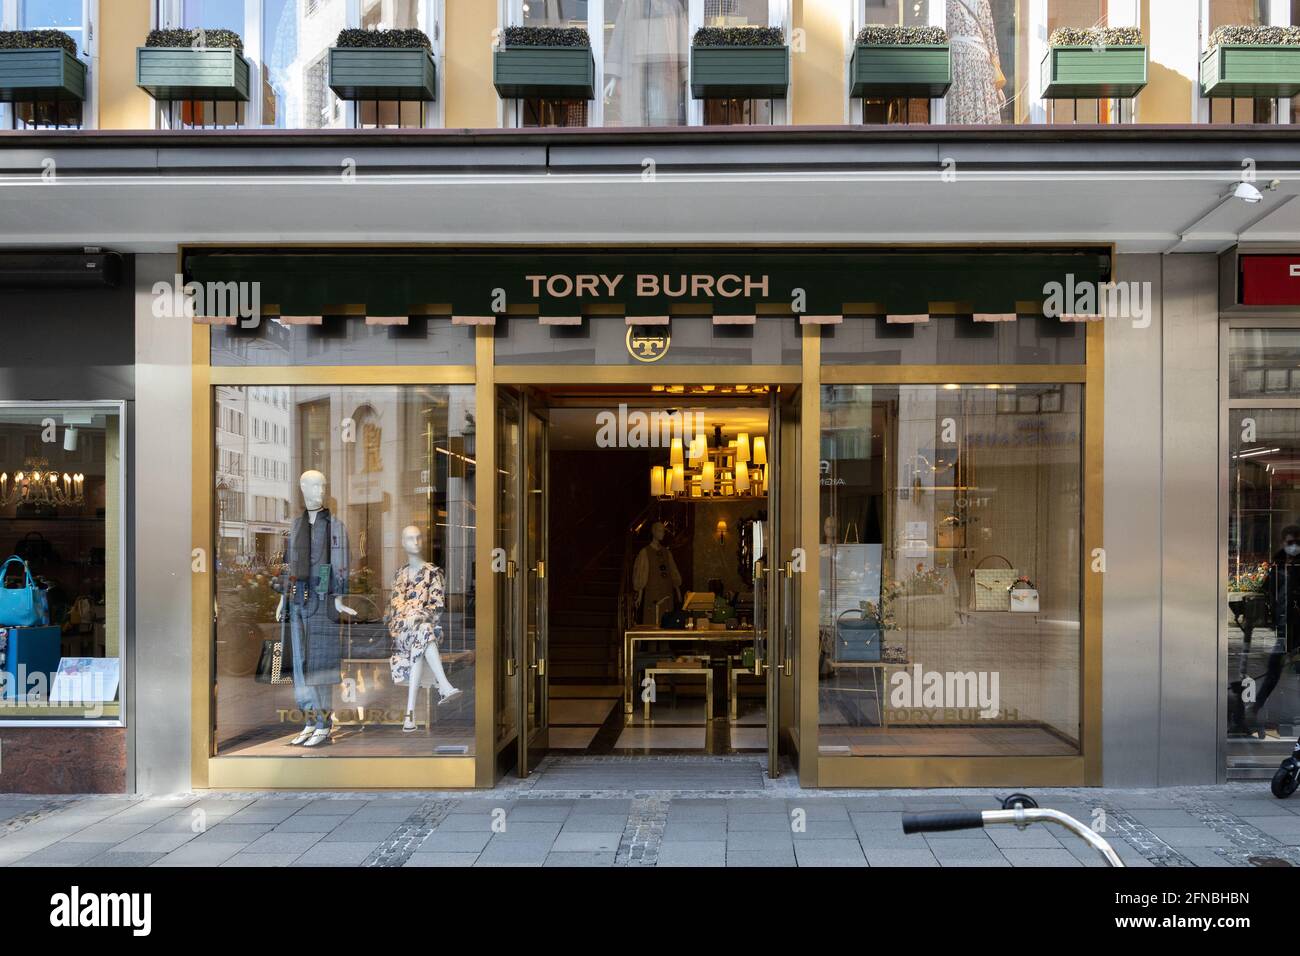 Tory Burch store sign in Munich town center Stock Photo - Alamy